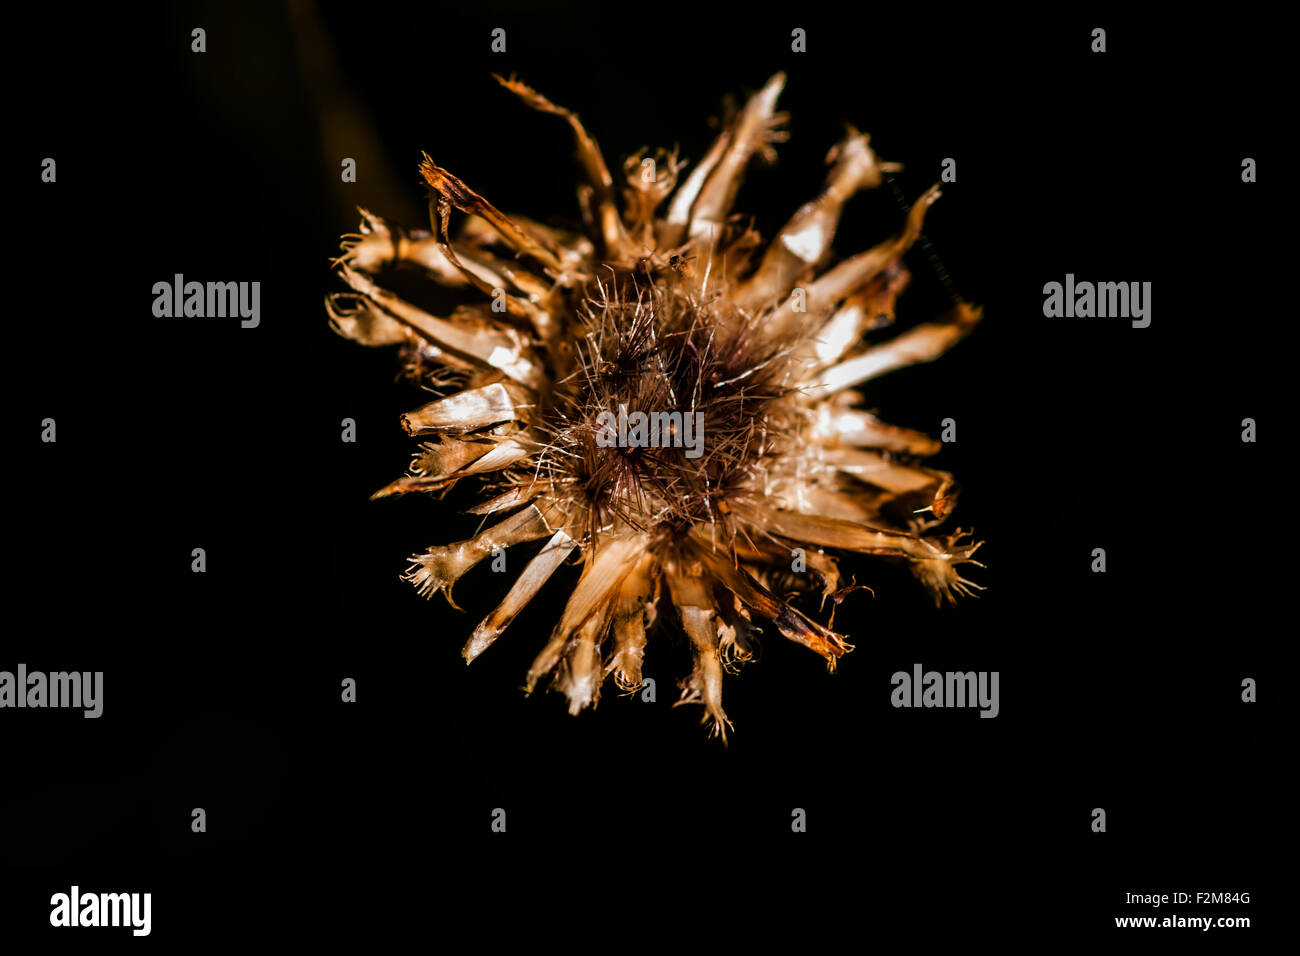 Withered wildflower in front of black background Stock Photo